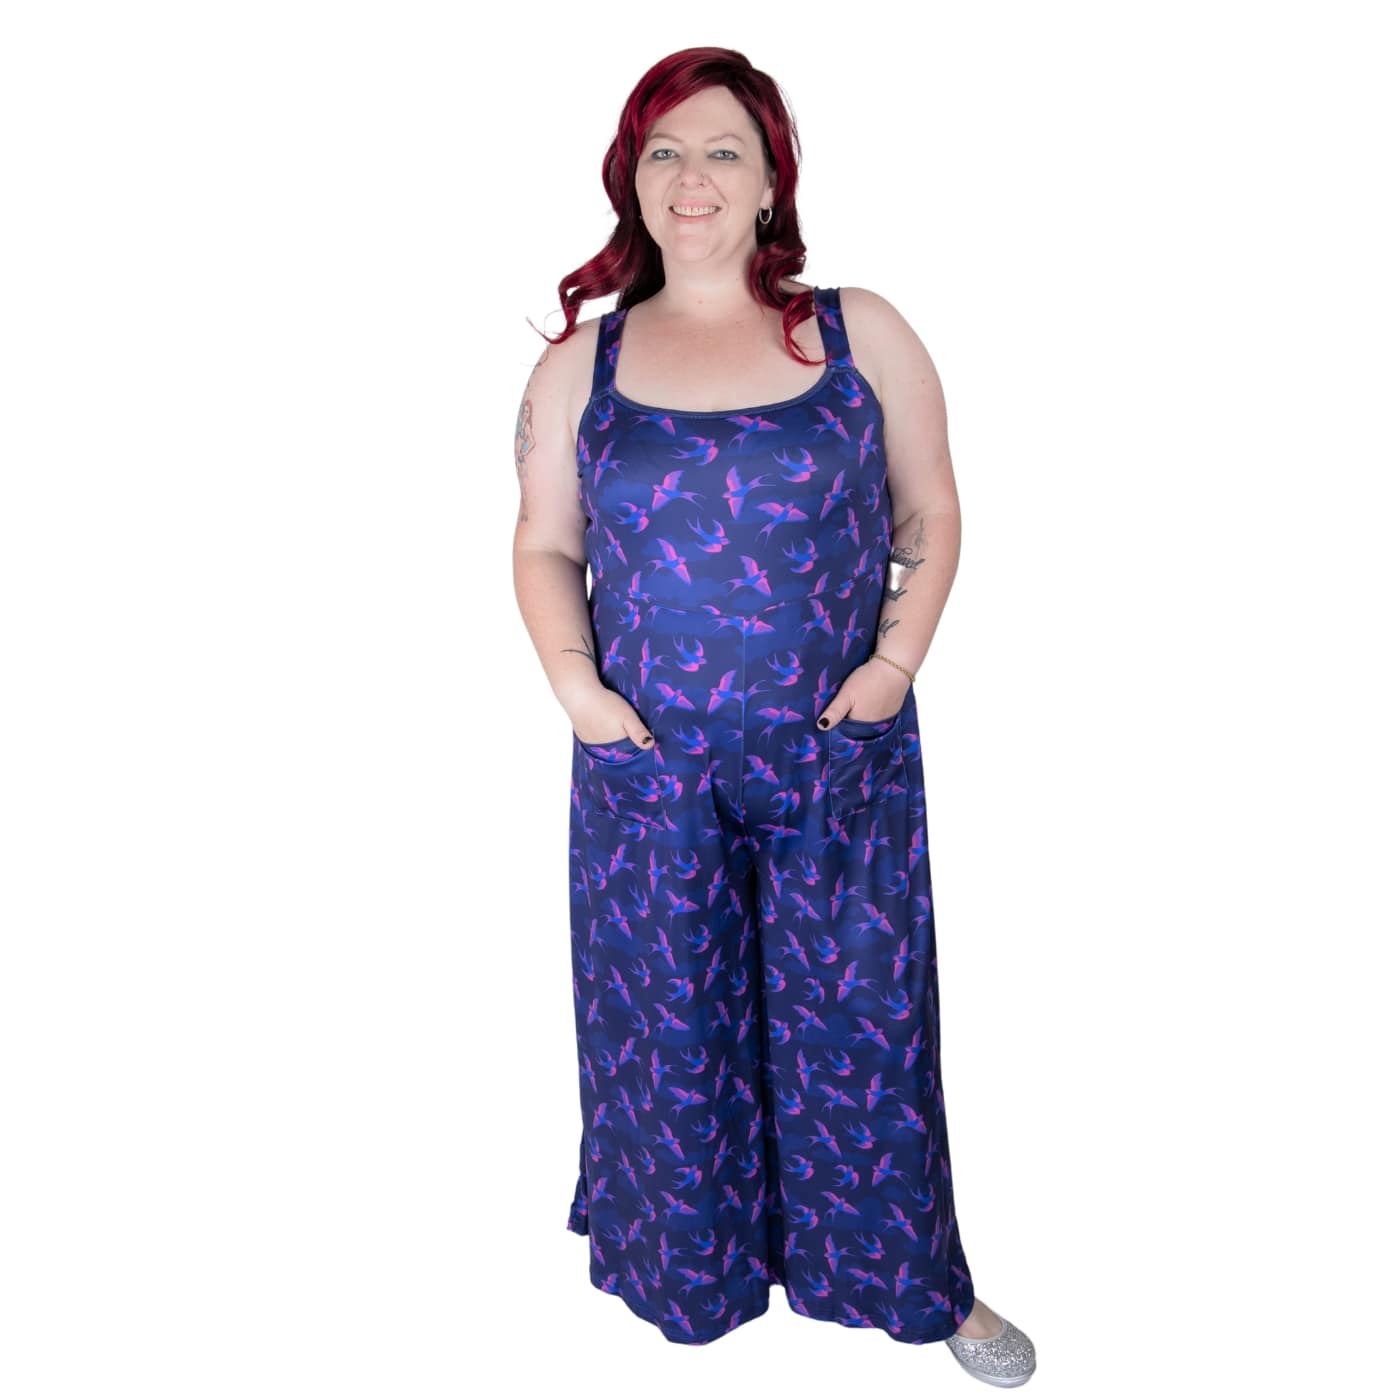 Swoop Jumpsuit by RainbowsAndFairies.com.au (Swallows - Bird Print - Overalls - Wide Leg Pants - Vintage Inspired - Kitsch - Pink Swallows - Blue) - SKU: CL_JUMPS_SWOOP_ORG - Pic-02